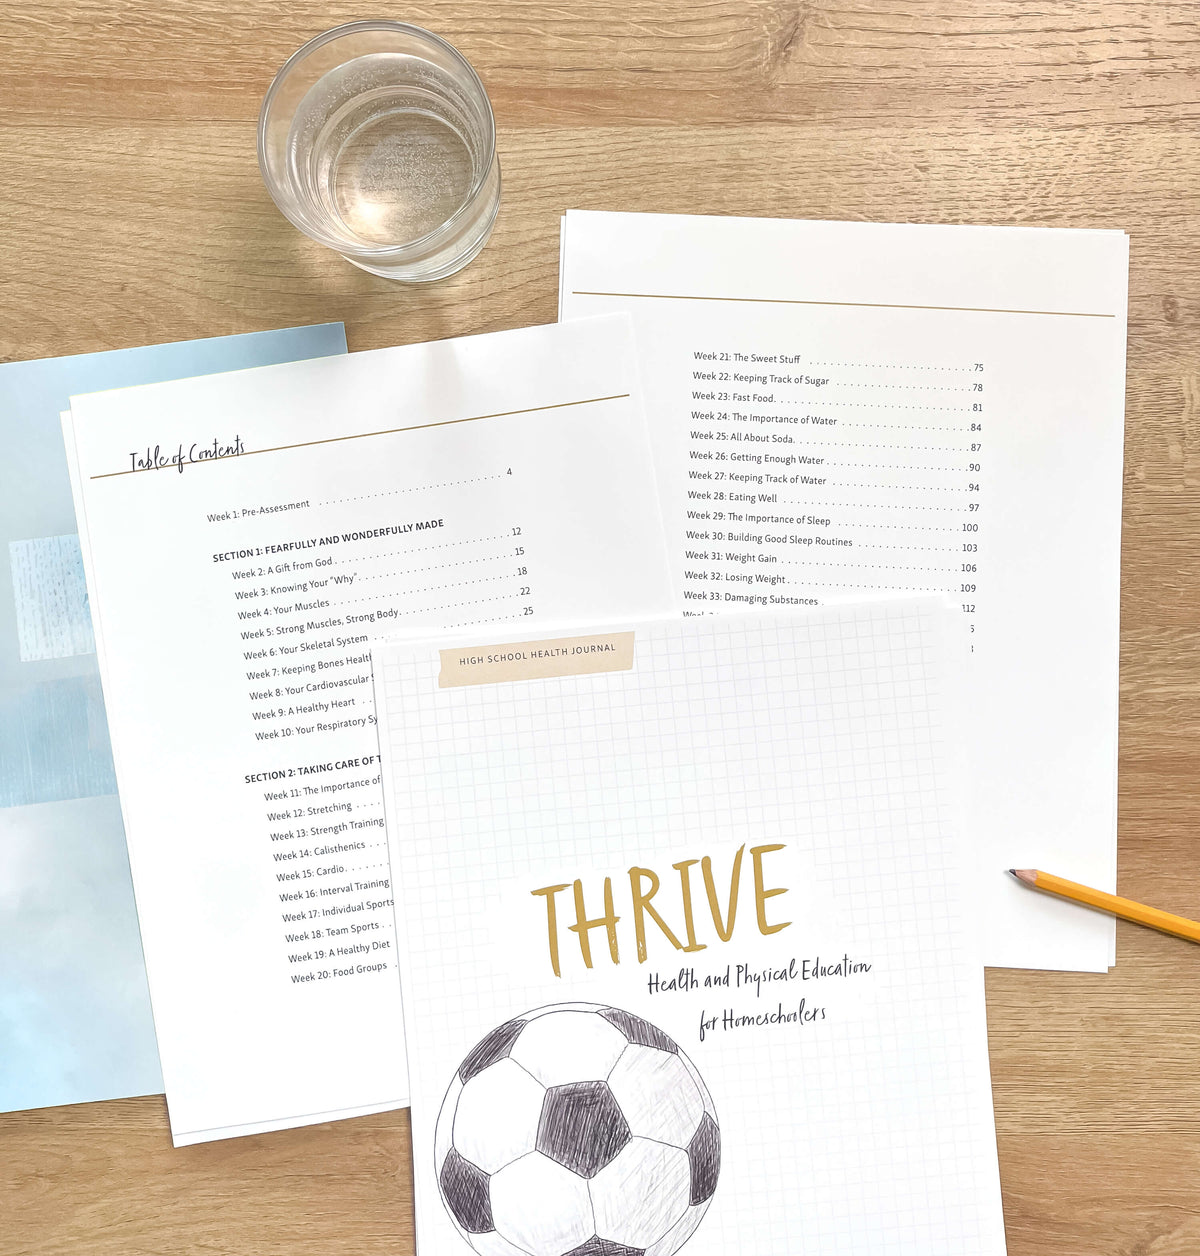 Thrive: Health and Physical Education for Homeschoolers (Digital)